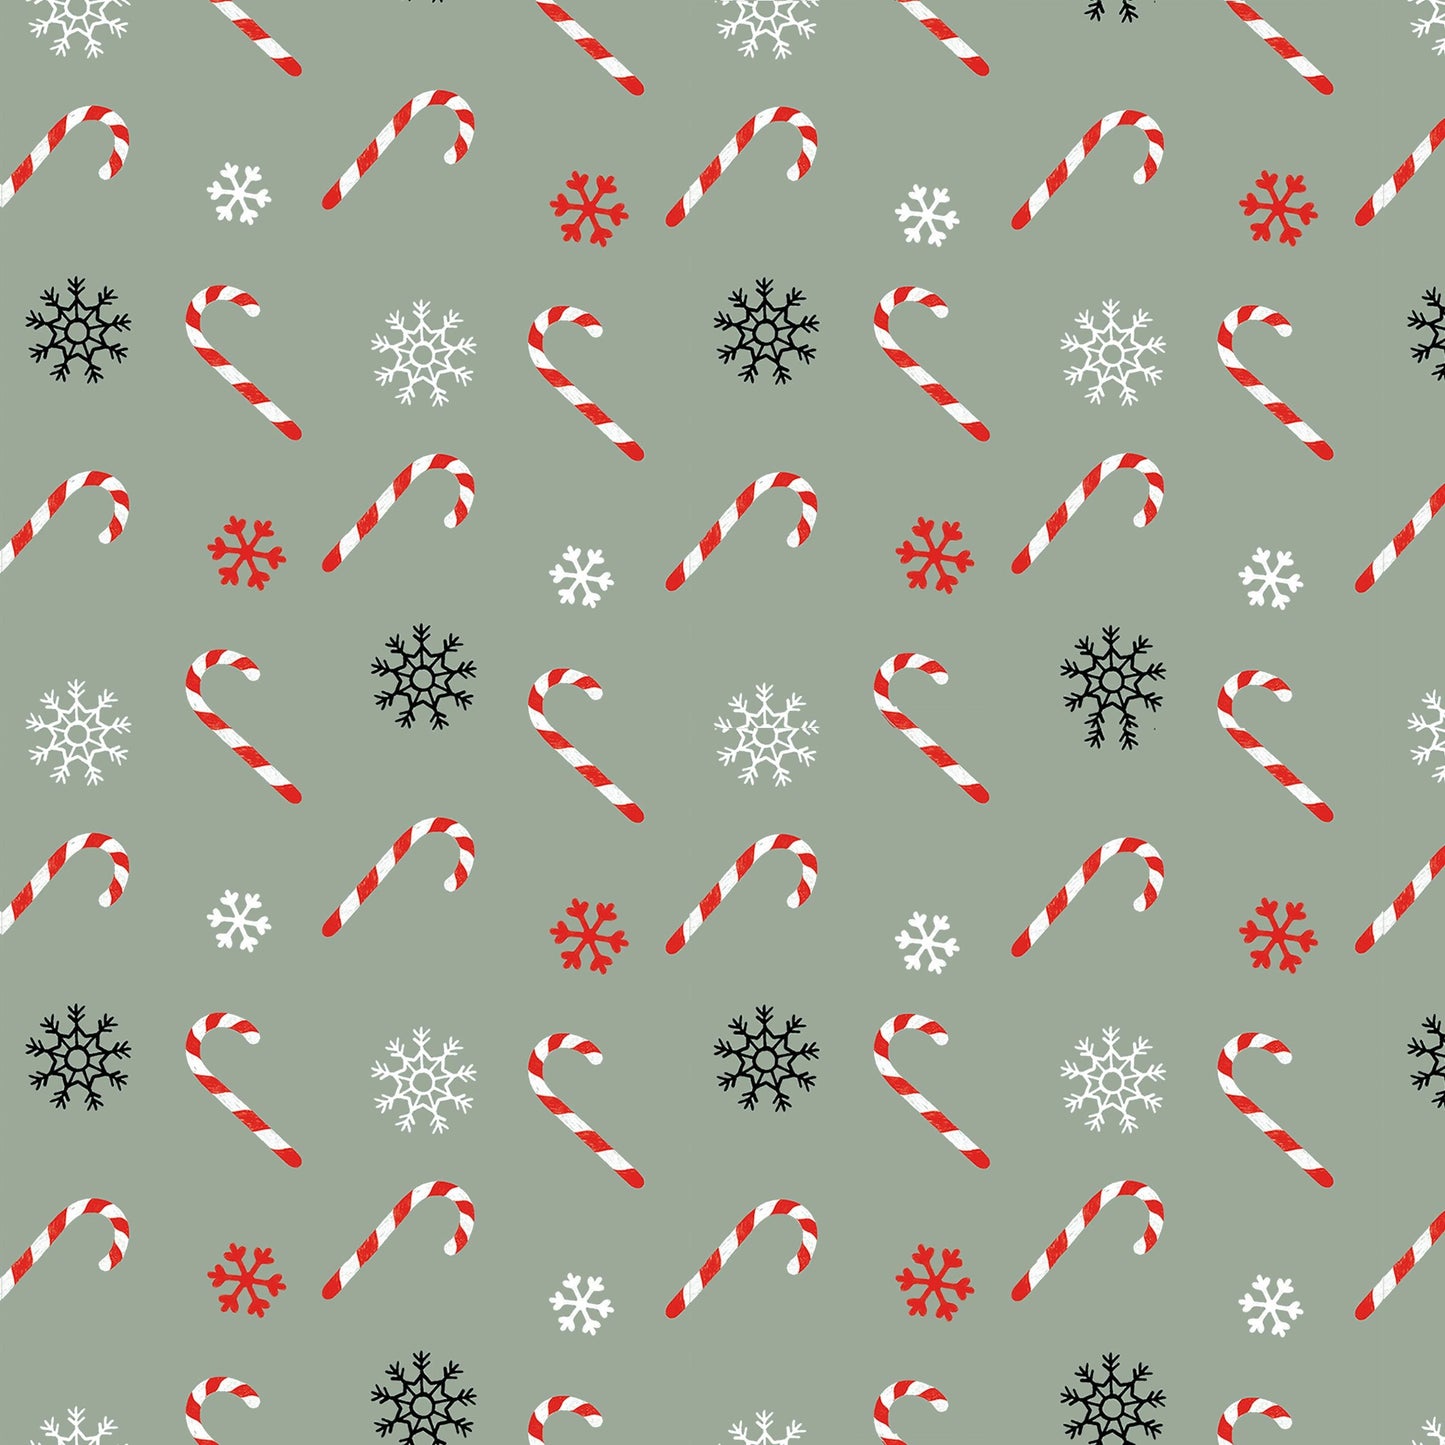 Christmas Memories by Lucie Crovatto Tossed Candy Canes Teal 5259-11 Cotton Woven Fabric